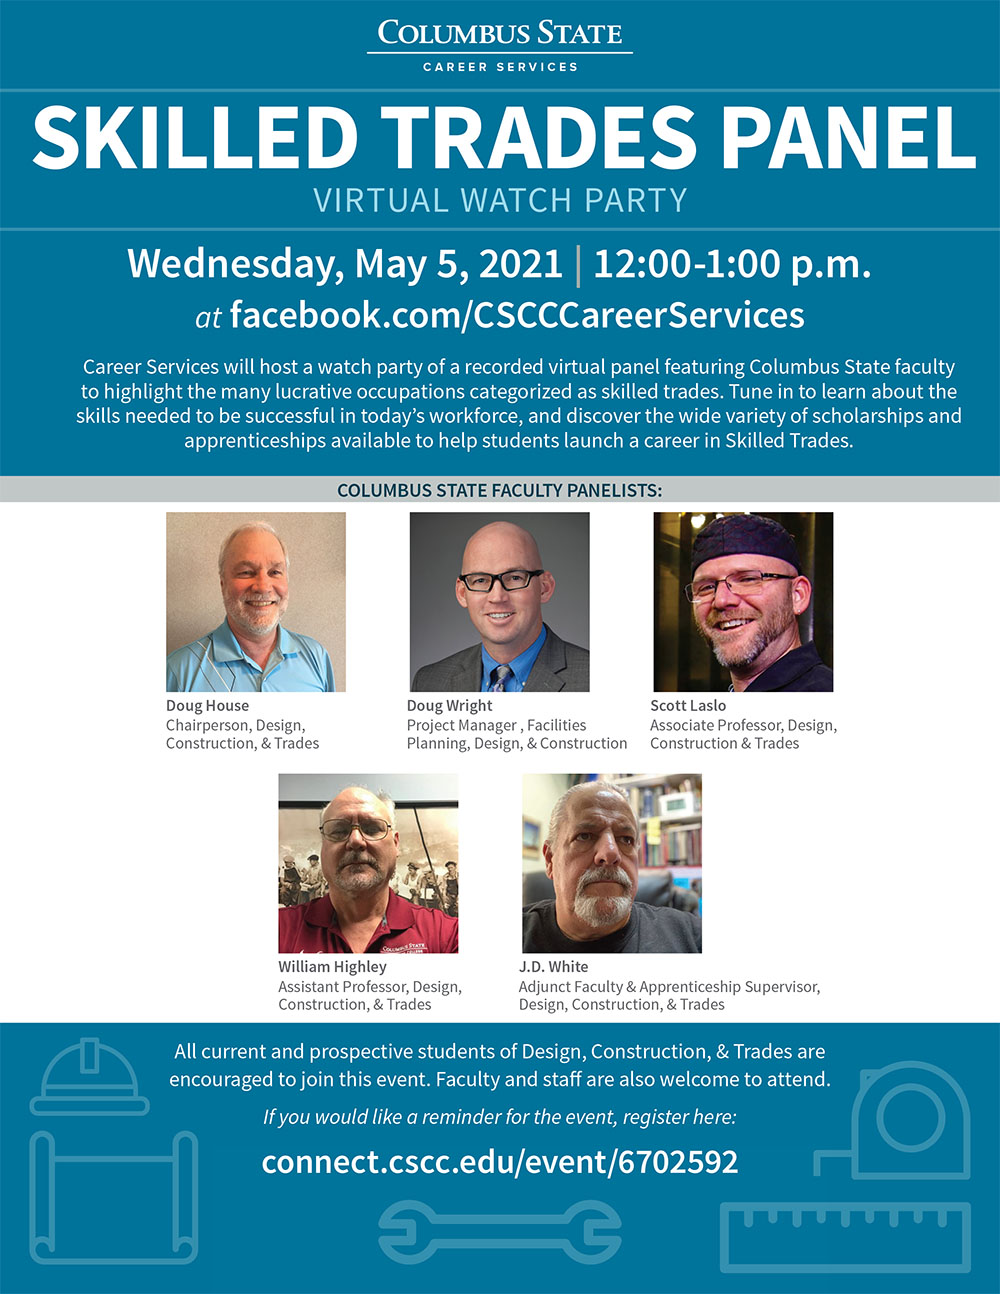 The poster for the Skilled Trades event. 